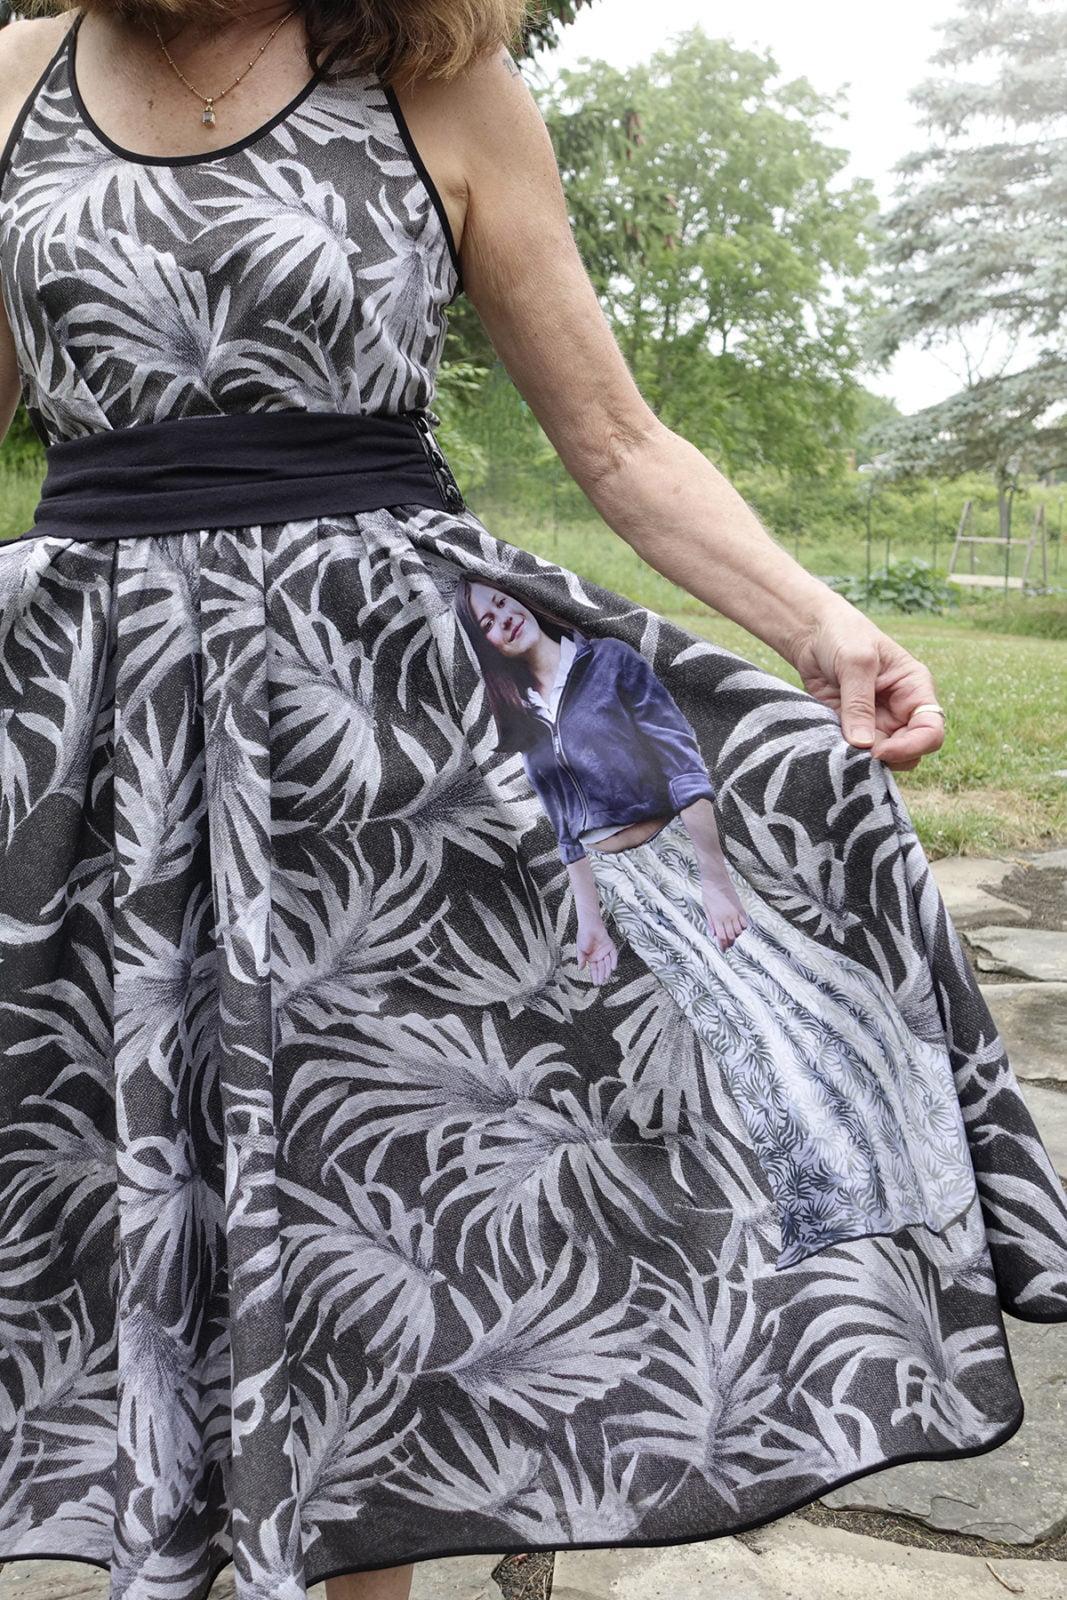 Robin Botie of Ithaca, New York, photoshops a picture of her daughter who died onto a floral design and then gets the photo printed onto fabric so whe can sew it up into a dress.